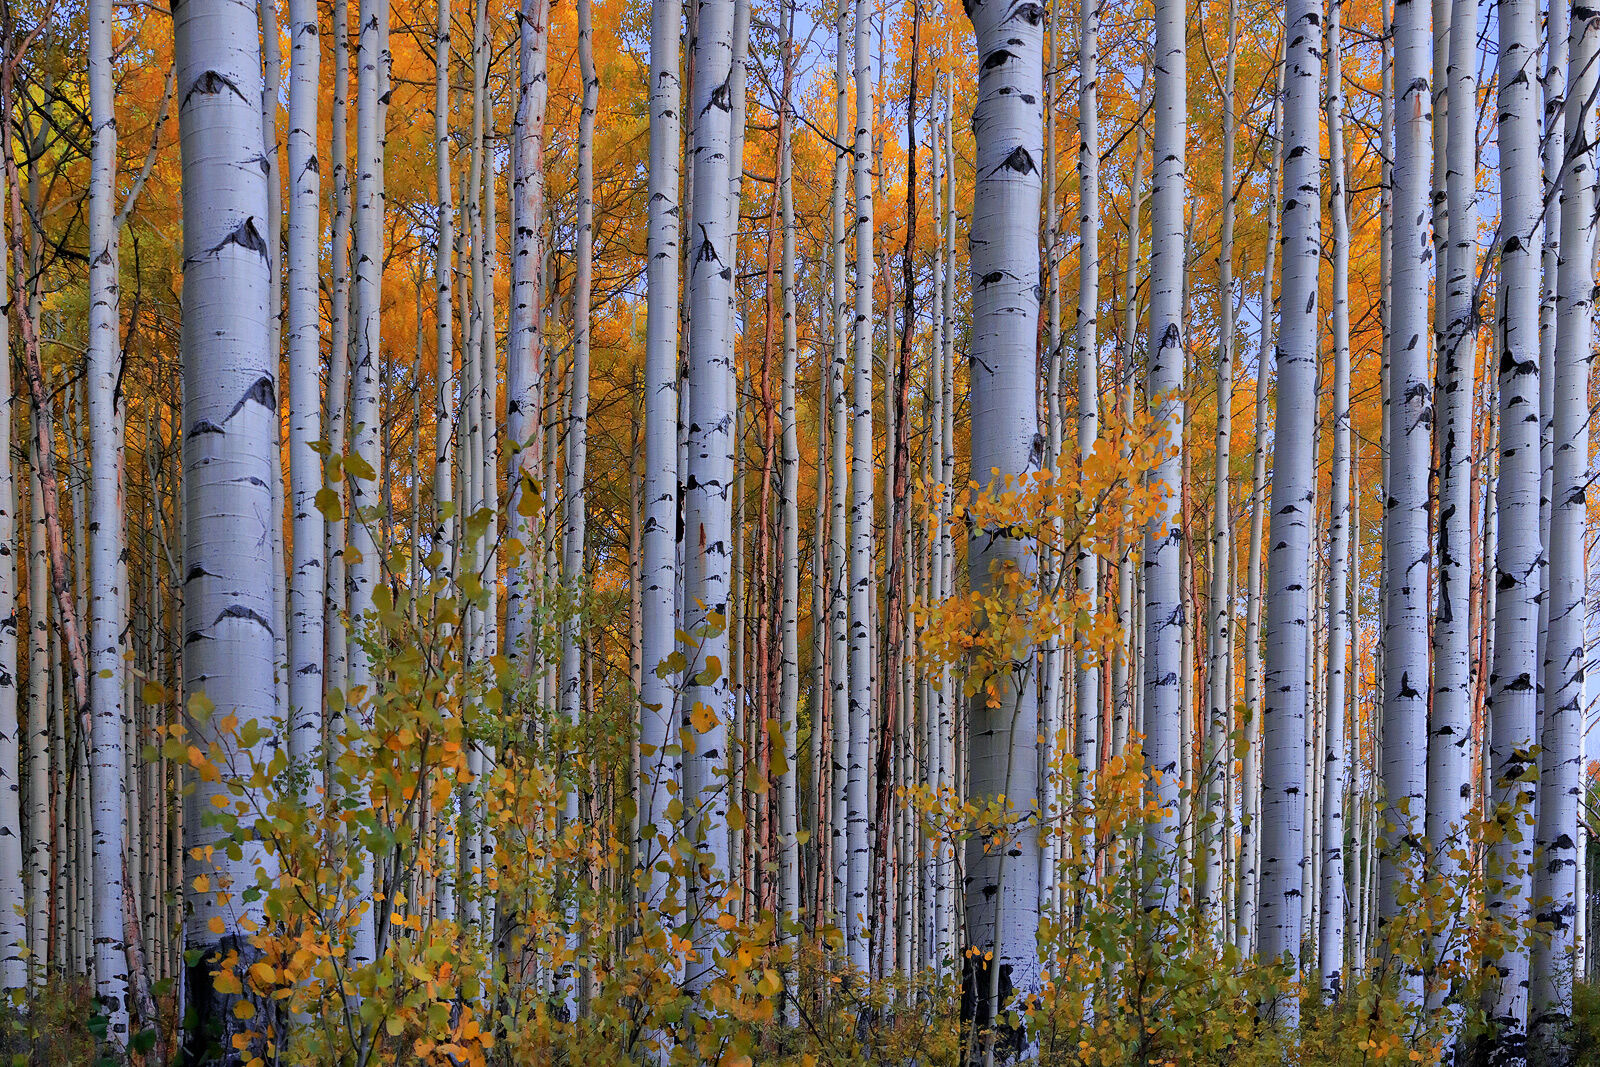 Aspen trees with yellow and green leaves are seen with mostly their trunks showing and are lit by residual light after the sun sets but the sky is still ight.